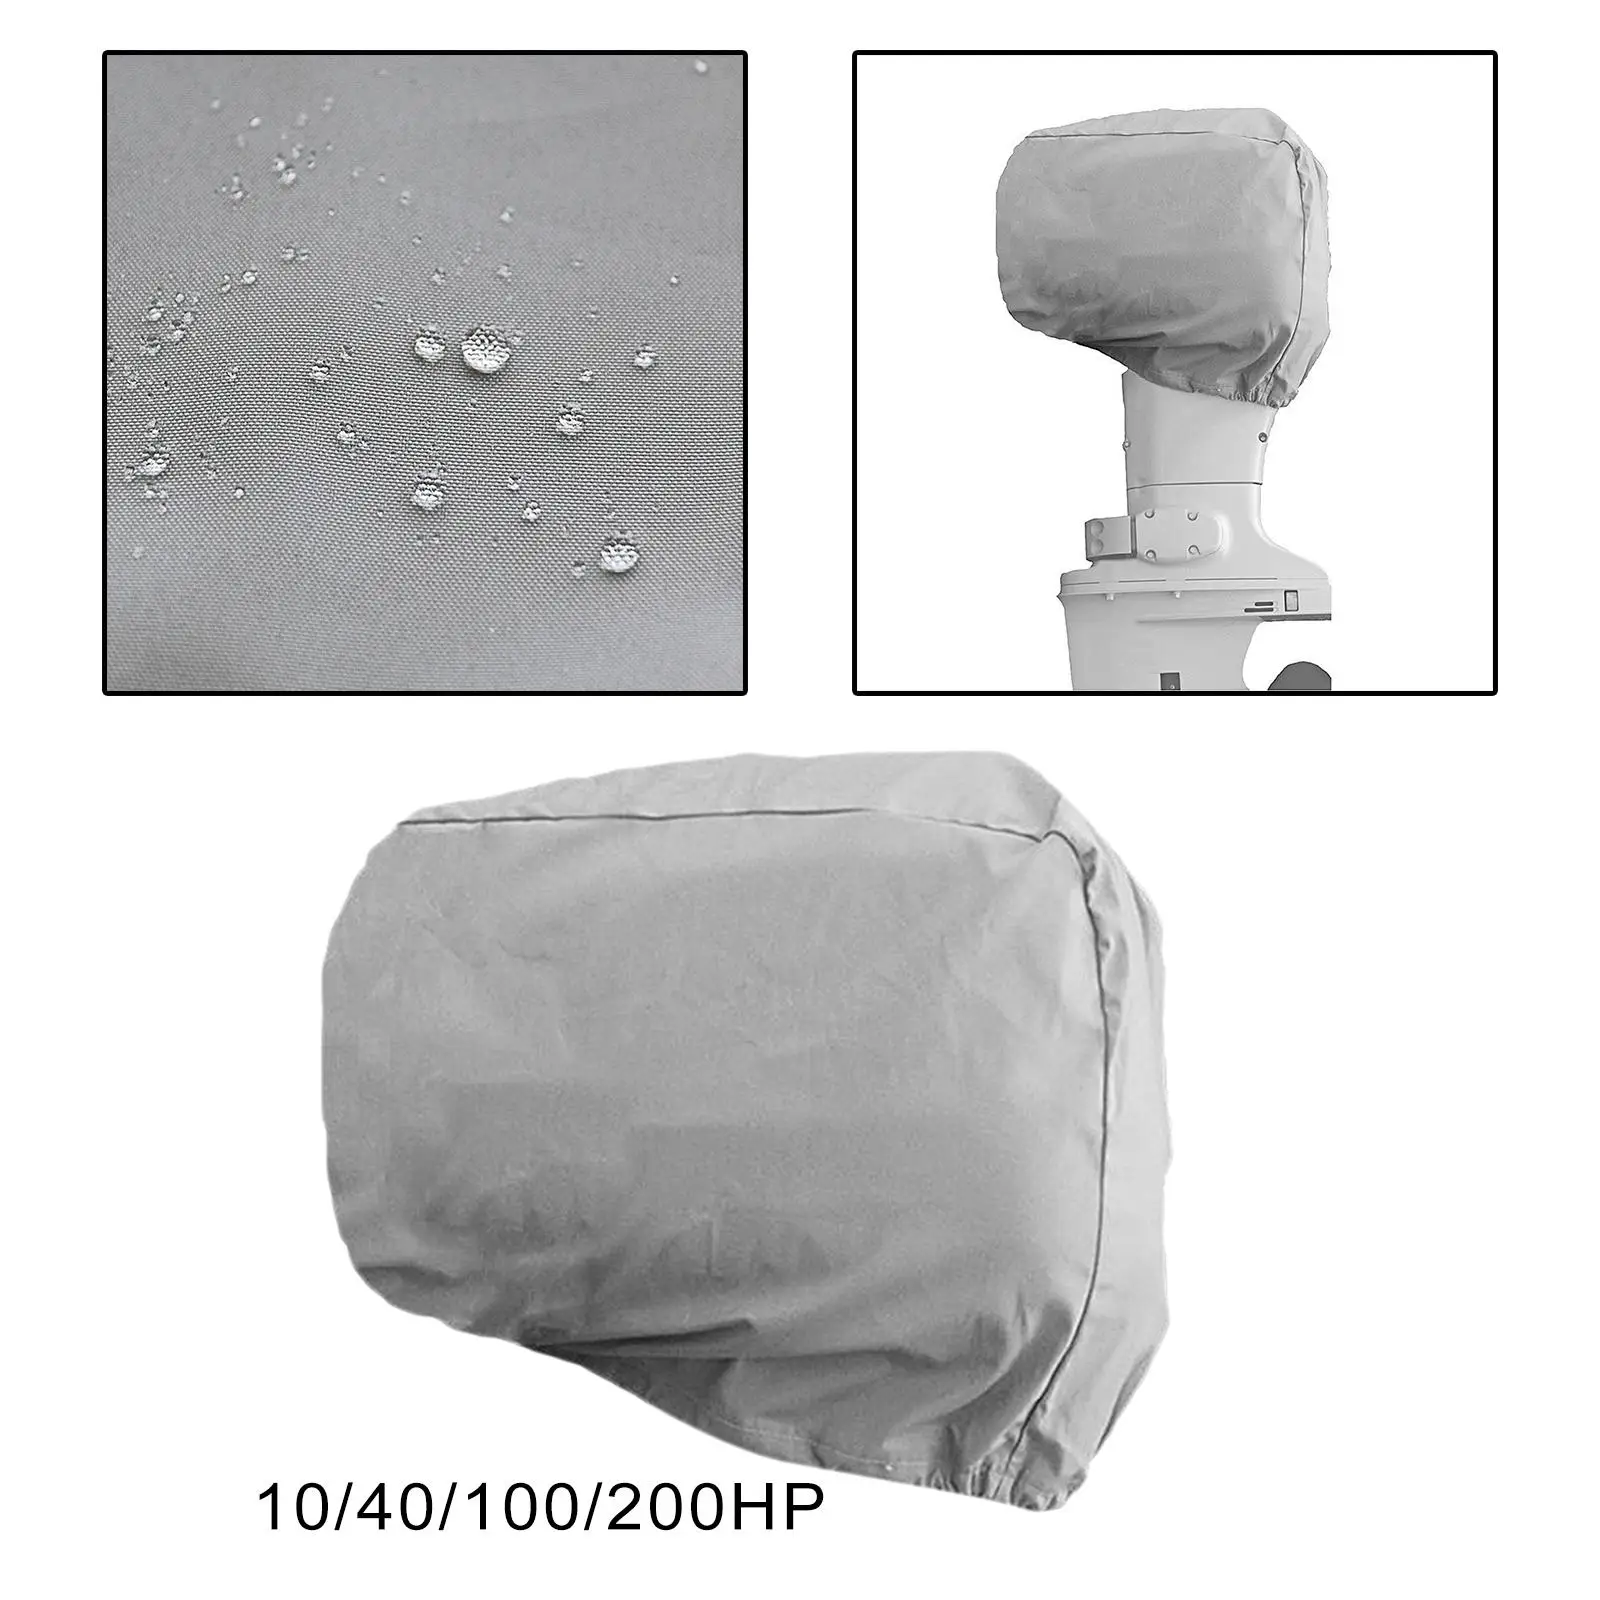 Boat Hood Covers Adjustable Protective Oxford Anti Scratch Outboard Motor Cover for Summer